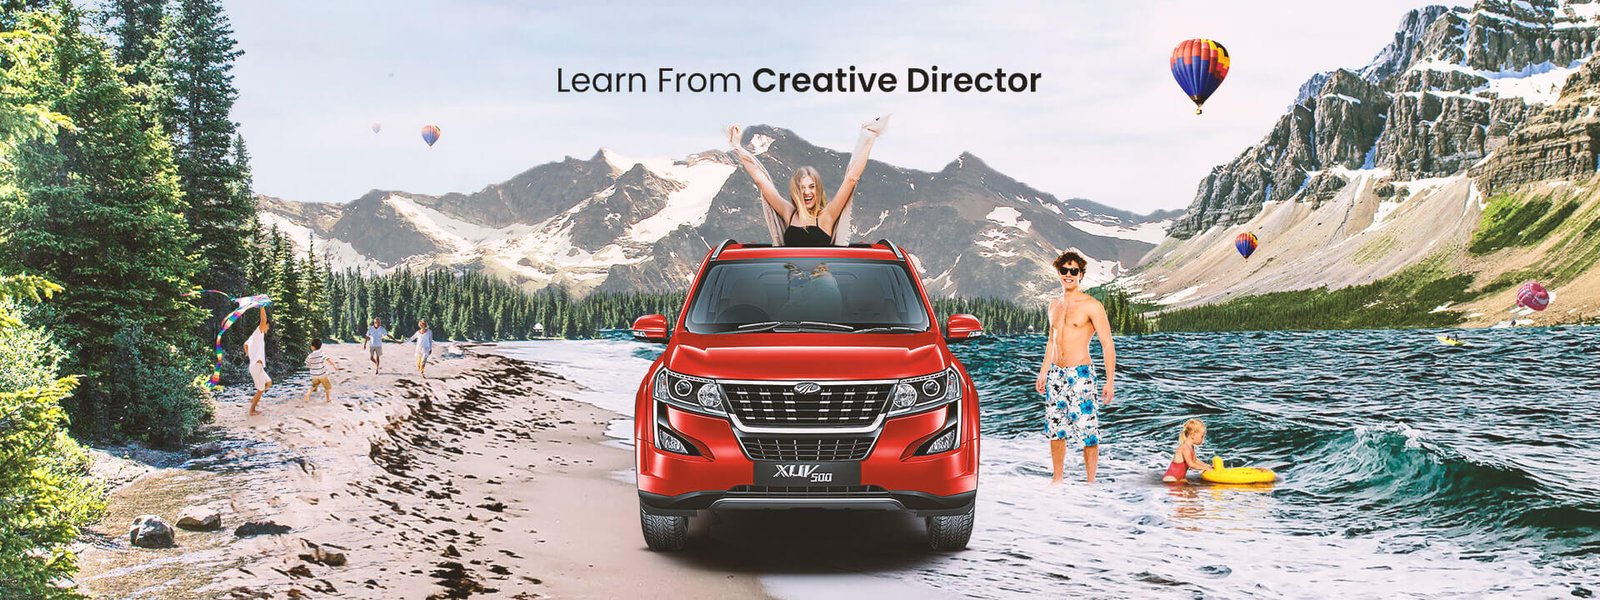 Learn from Creative Director